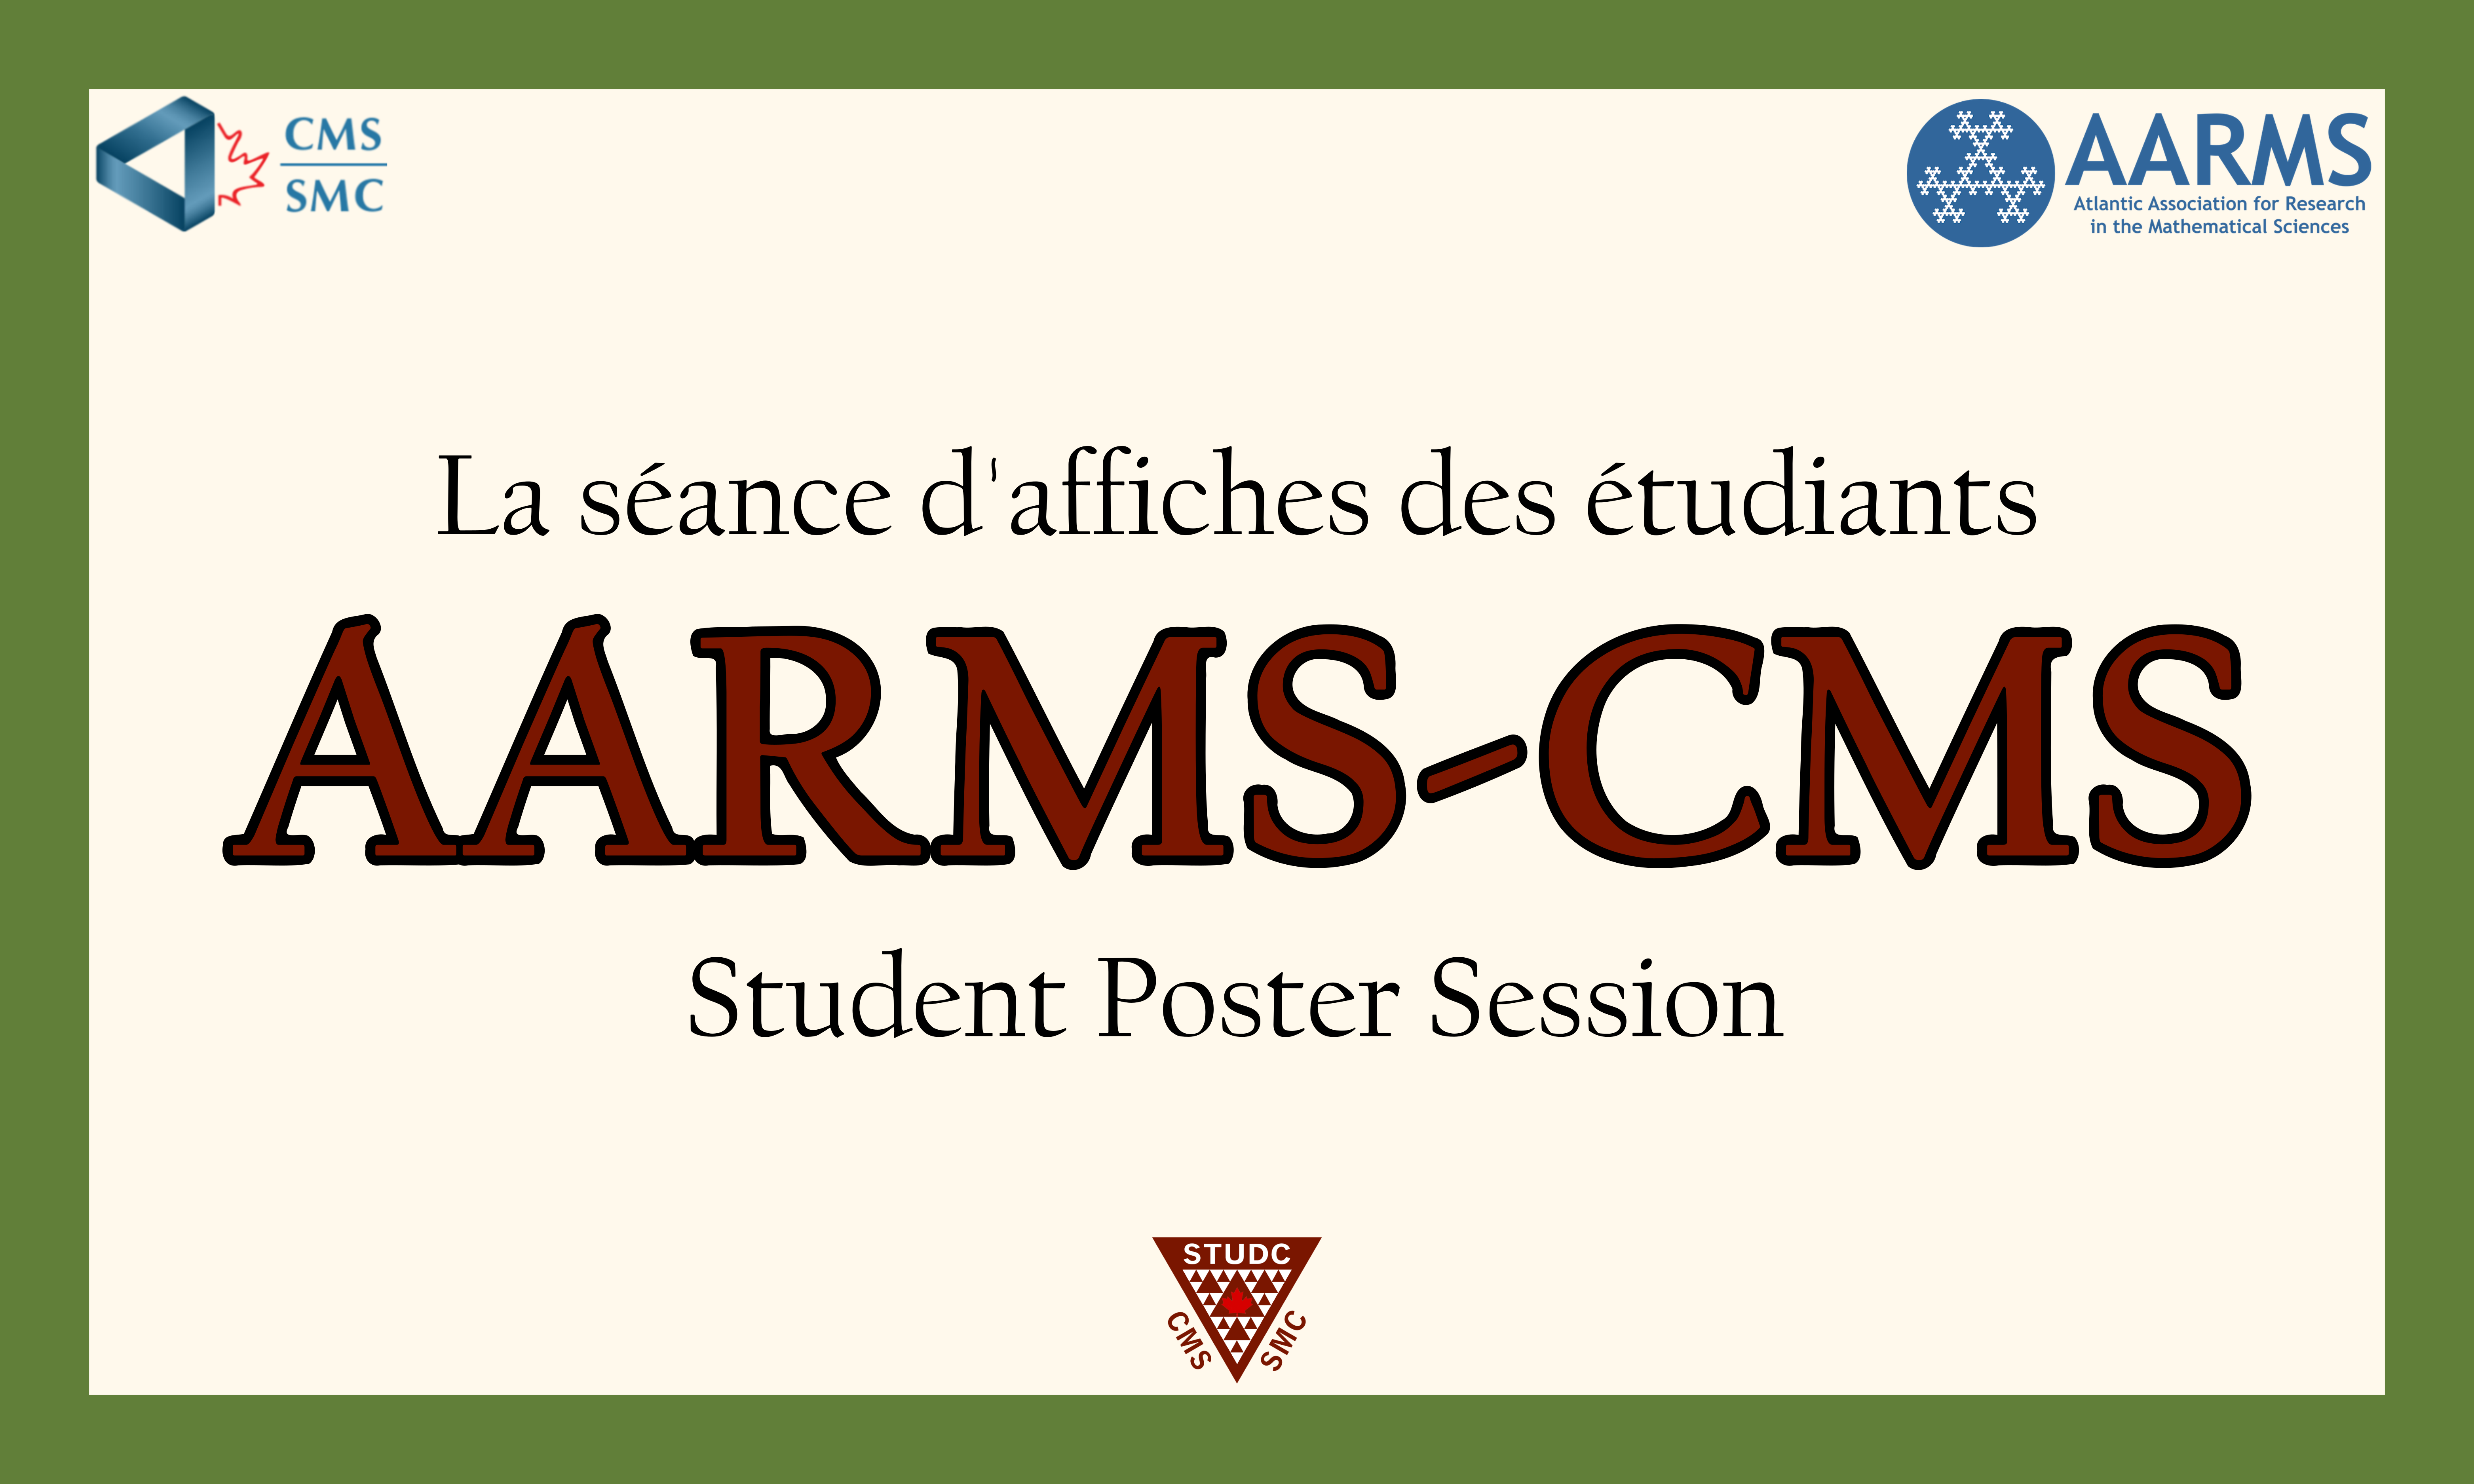 AARMS-CMS Student Poster Session Winners